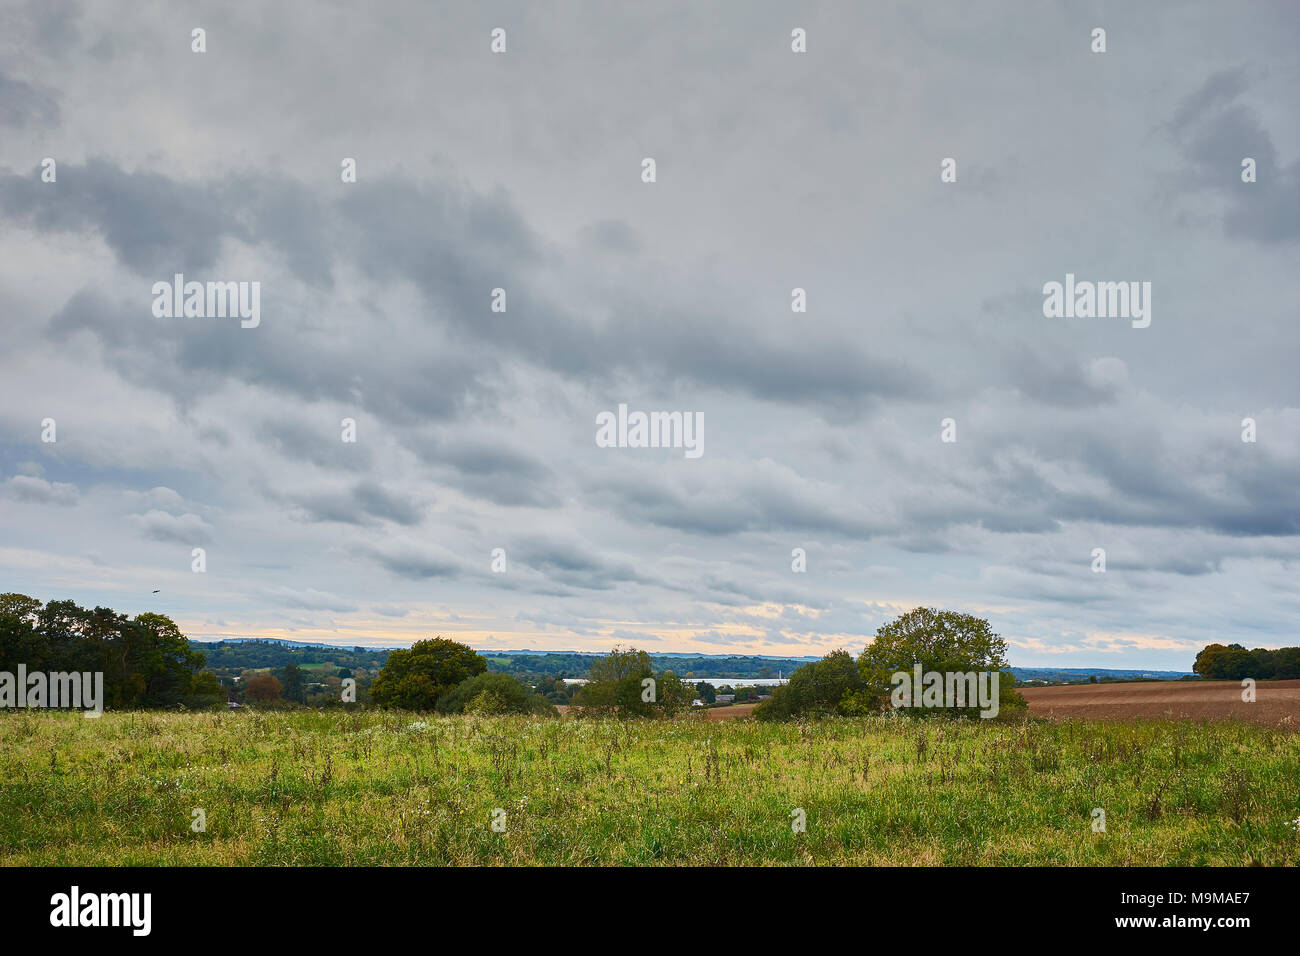 Green field with a row of trees and large amount of sky overlooking Colthrop, West Berkshire, UK Stock Photo